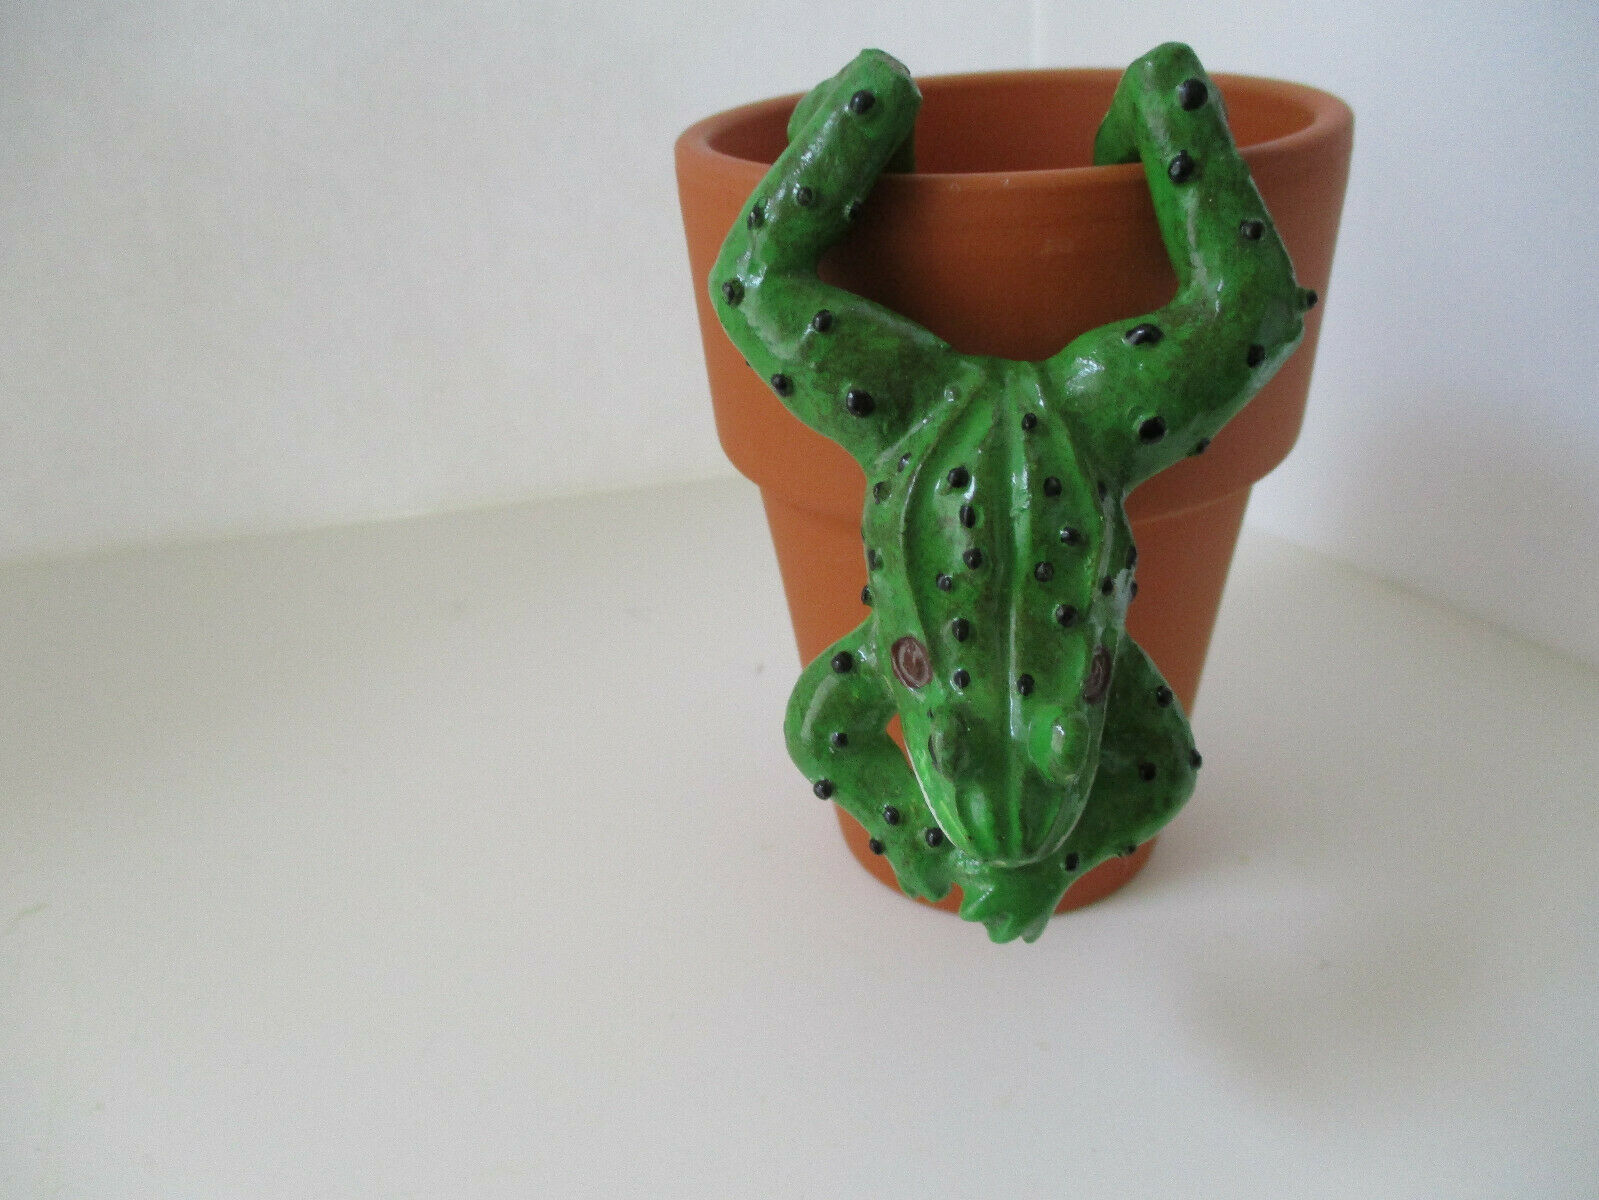 Collectible Frog Flower Pot Hanger, Green Frog Hangs By Feet